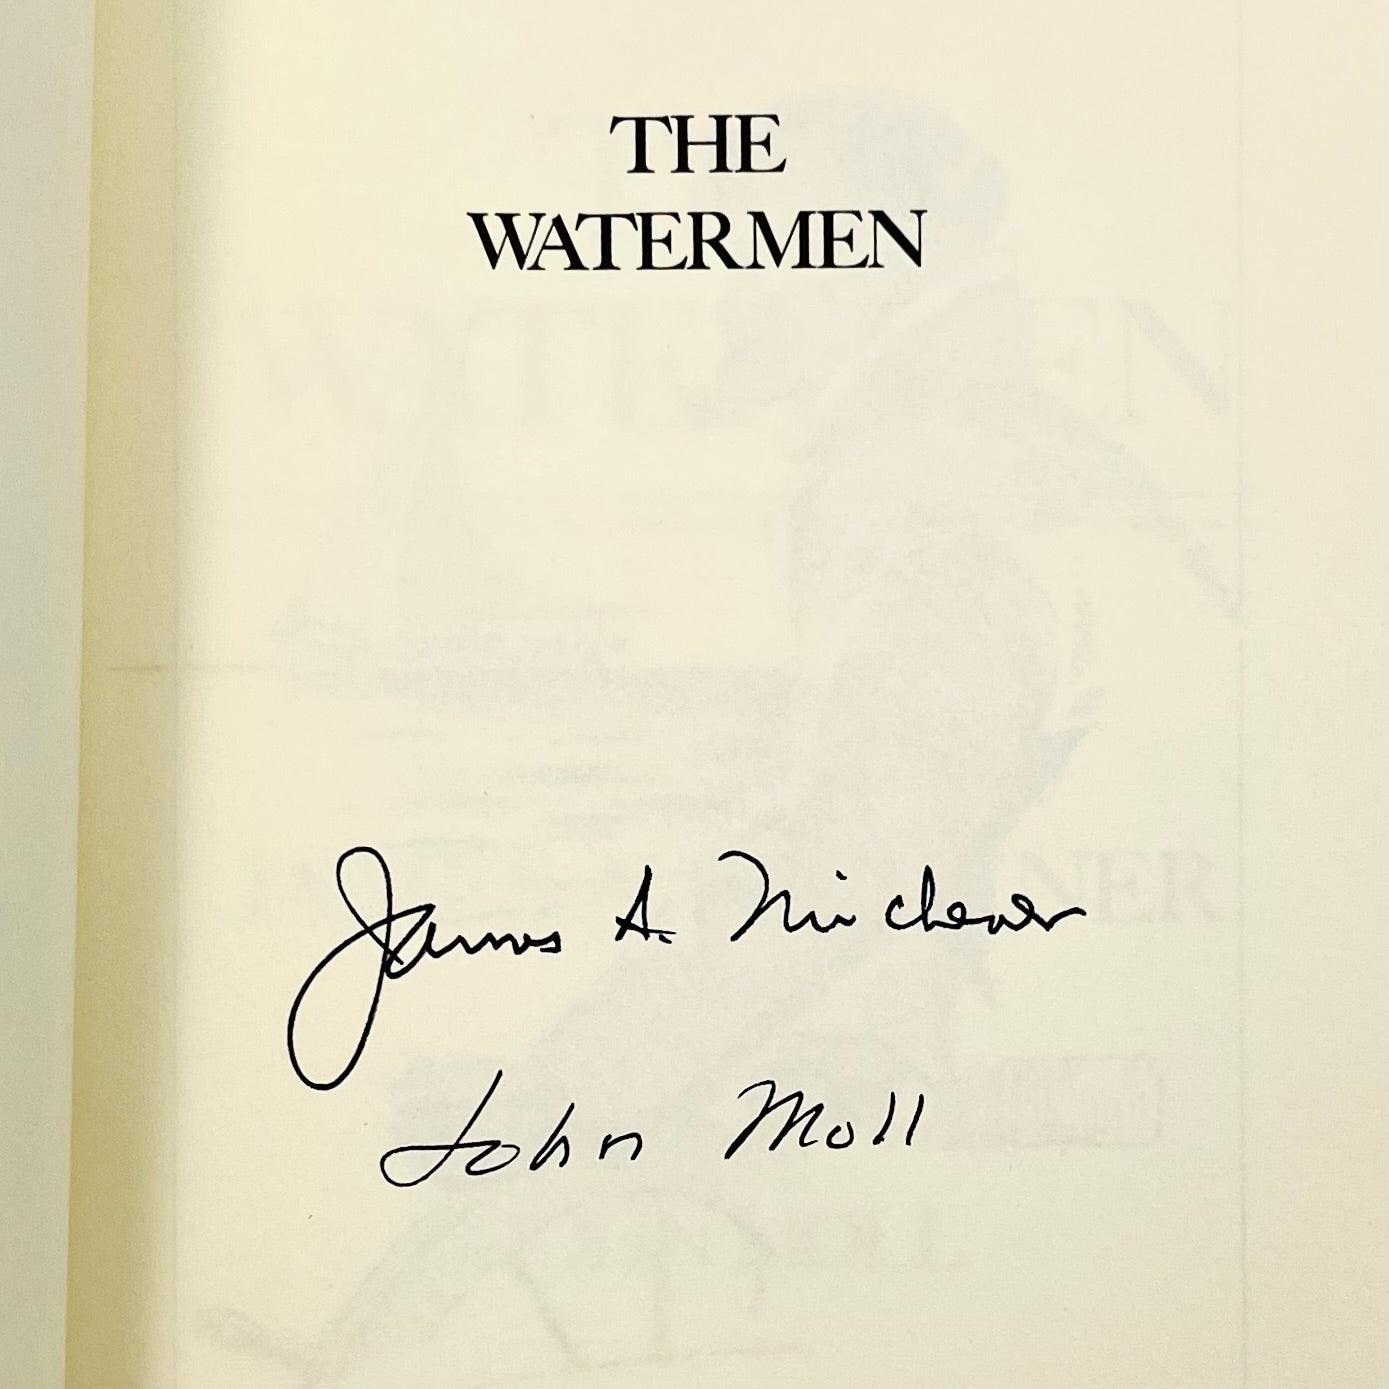 The Watermen (signed by James Michener and John Moll, illustrator) - Grinning Cat Books - Books - SIGNED